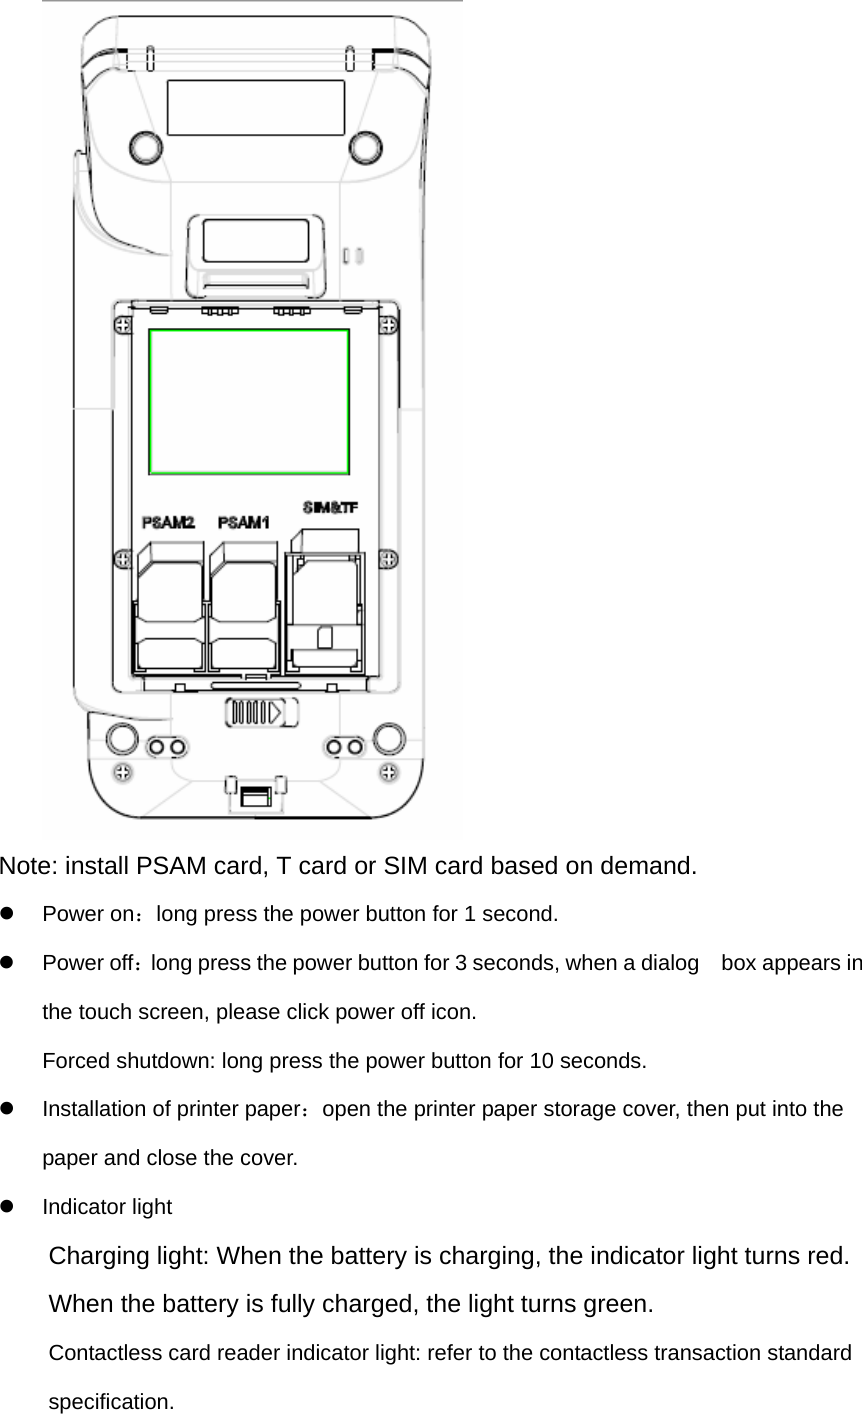  Note: install PSAM card, T card or SIM card based on demand. z Power on：long press the power button for 1 second. z Power off：long press the power button for 3 seconds, when a dialog    box appears in the touch screen, please click power off icon.   Forced shutdown: long press the power button for 10 seconds. z  Installation of printer paper：open the printer paper storage cover, then put into the paper and close the cover. z Indicator light Charging light: When the battery is charging, the indicator light turns red.       When the battery is fully charged, the light turns green.   Contactless card reader indicator light: refer to the contactless transaction standard specification.  